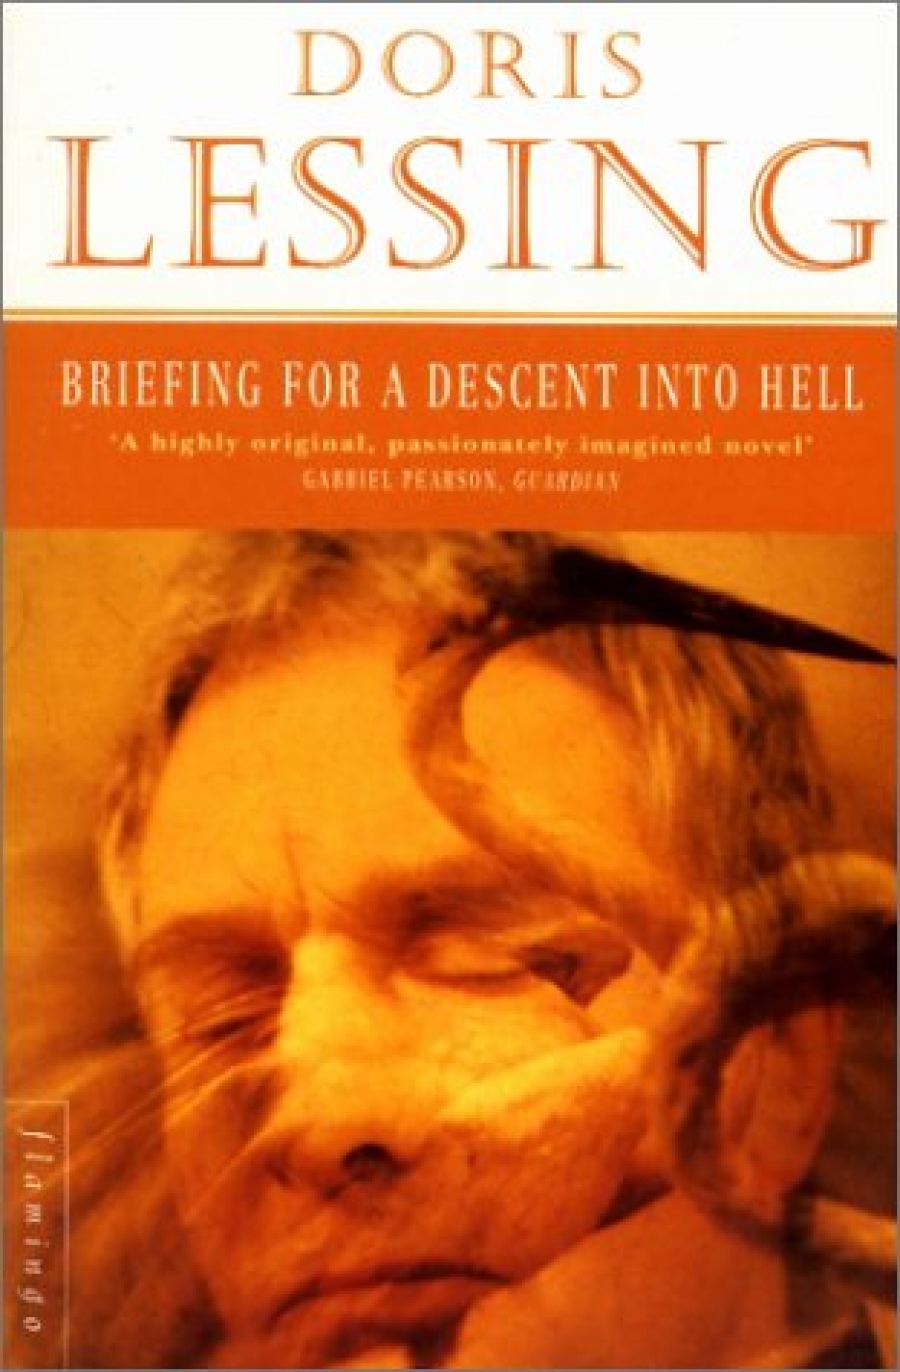 Lessing, Doris Briefing for a Descent into Hell 